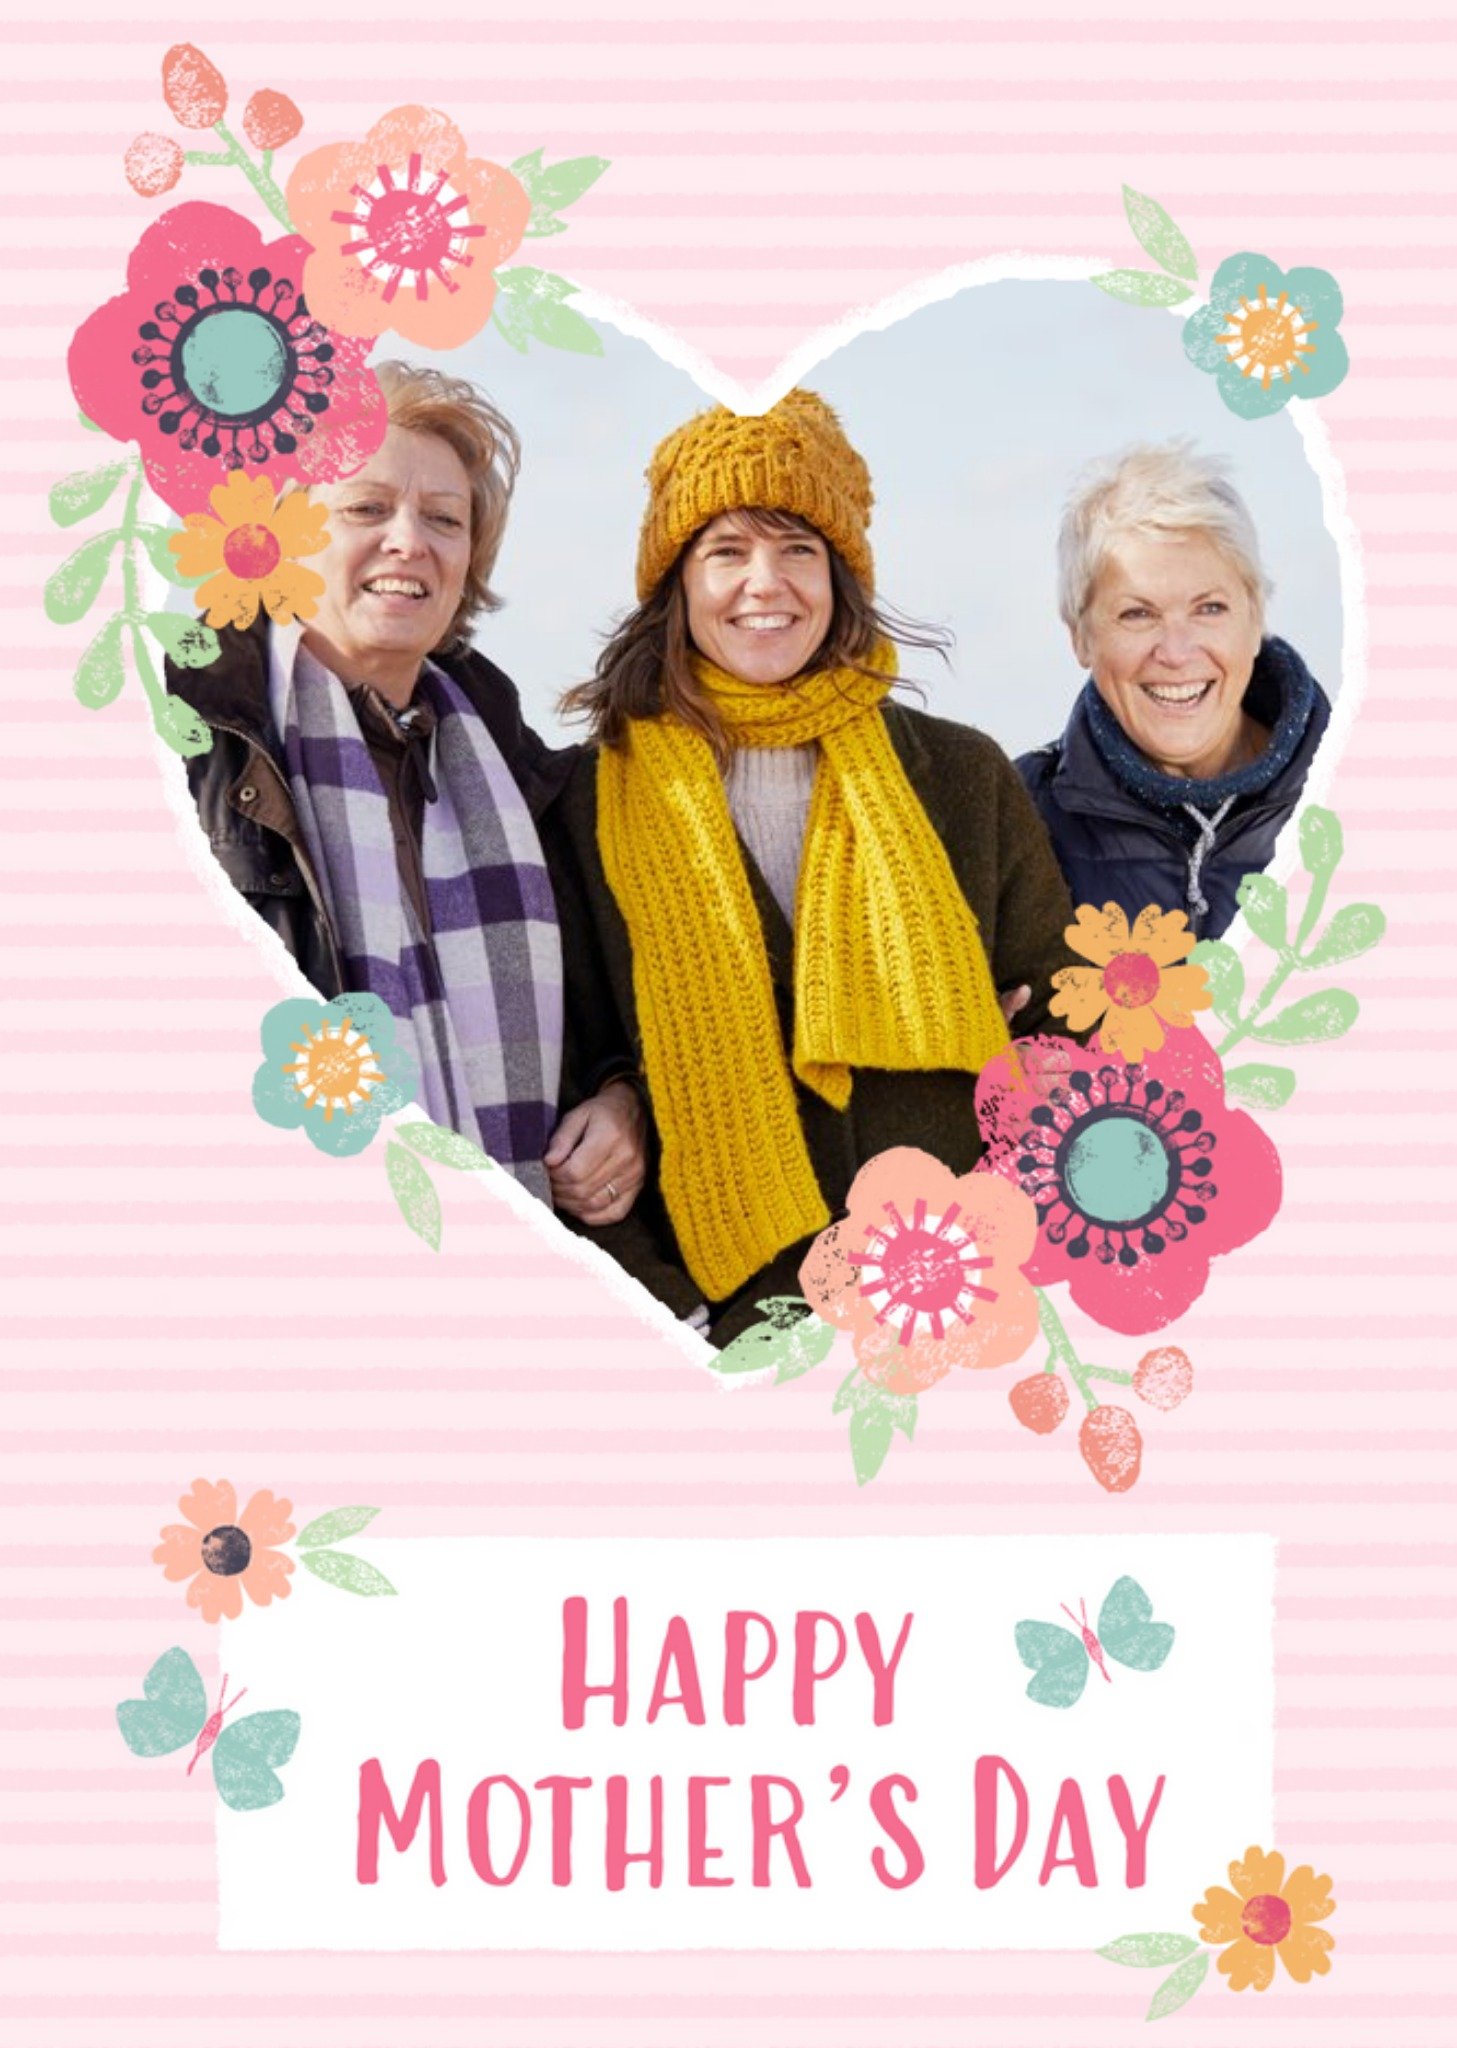 Moonpig Striped And Flower Design Happy Mothers Day Photo Card Ecard